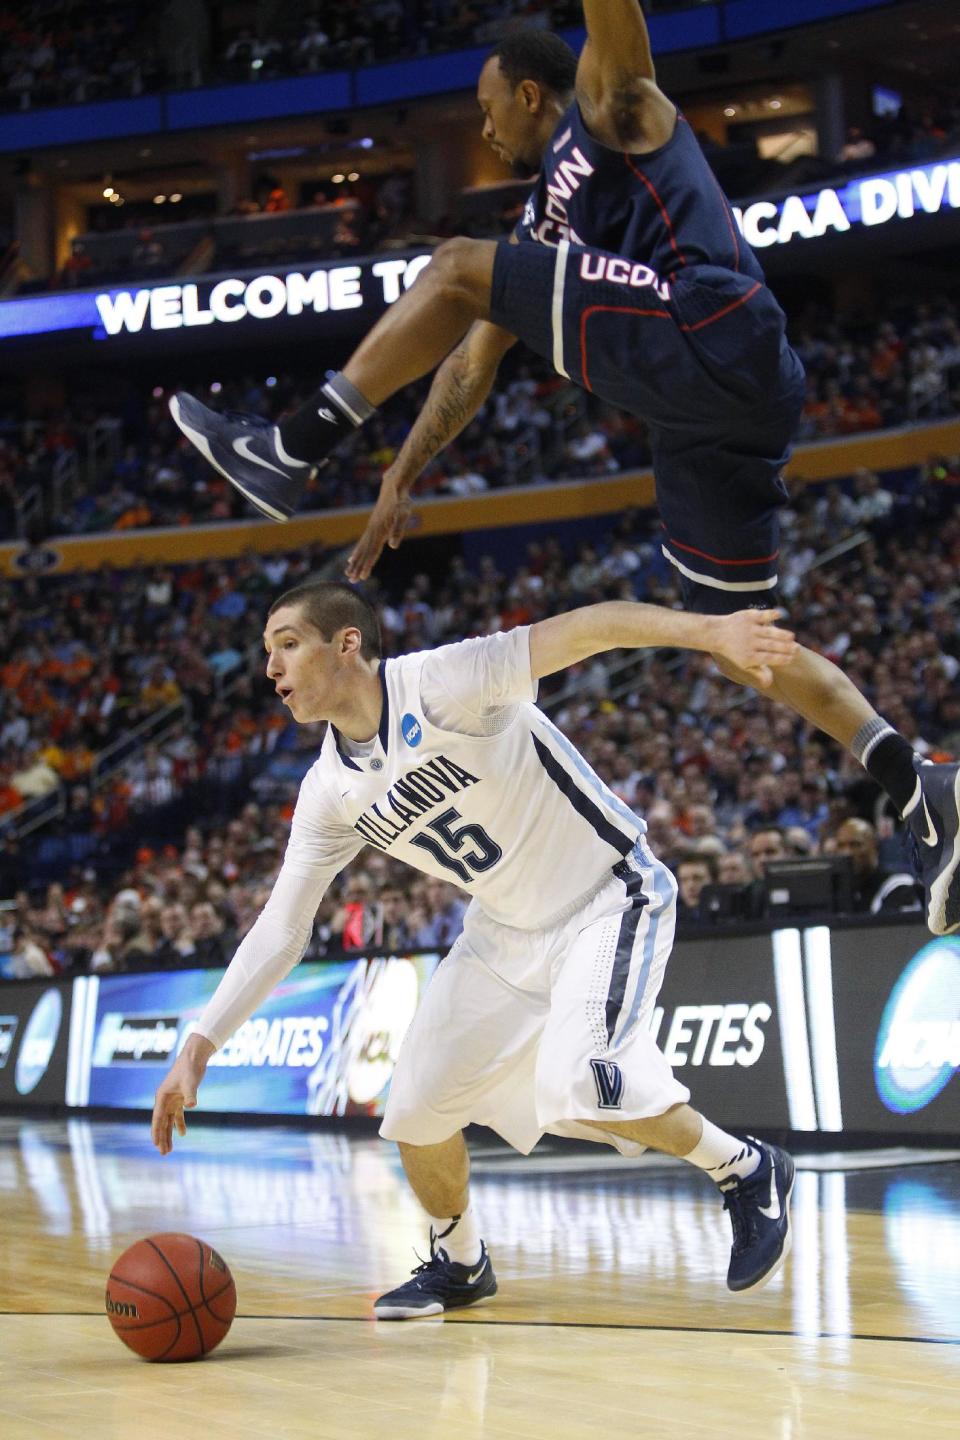 Villanova's Ryan Arcidiacono (15) drives under Connecticut's Ryan Boatright during the first half of a third-round game in the NCAA men's college basketball tournament in Buffalo, N.Y., Saturday, March 22, 2014. (AP Photo/Bill Wippert)